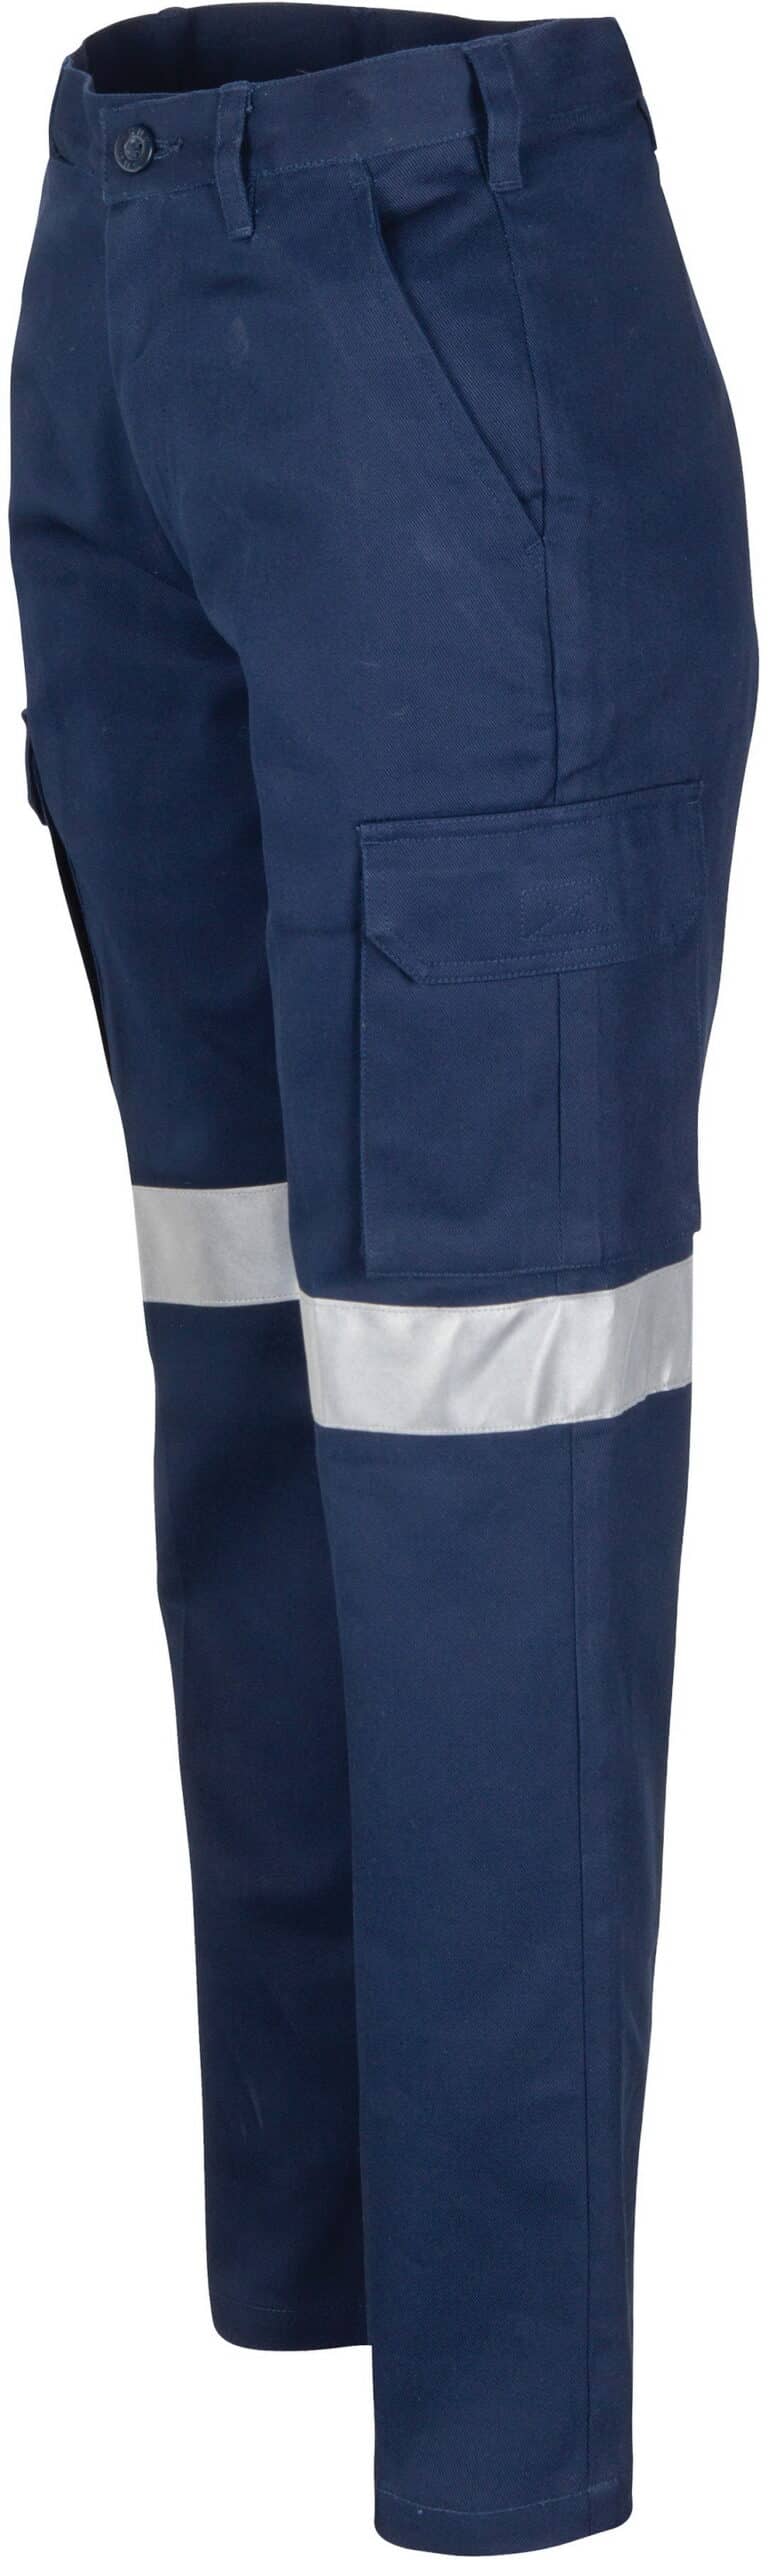 DNC Workwear Ladies Cotton Drill Cargo Pants with 3M Reflective Tape